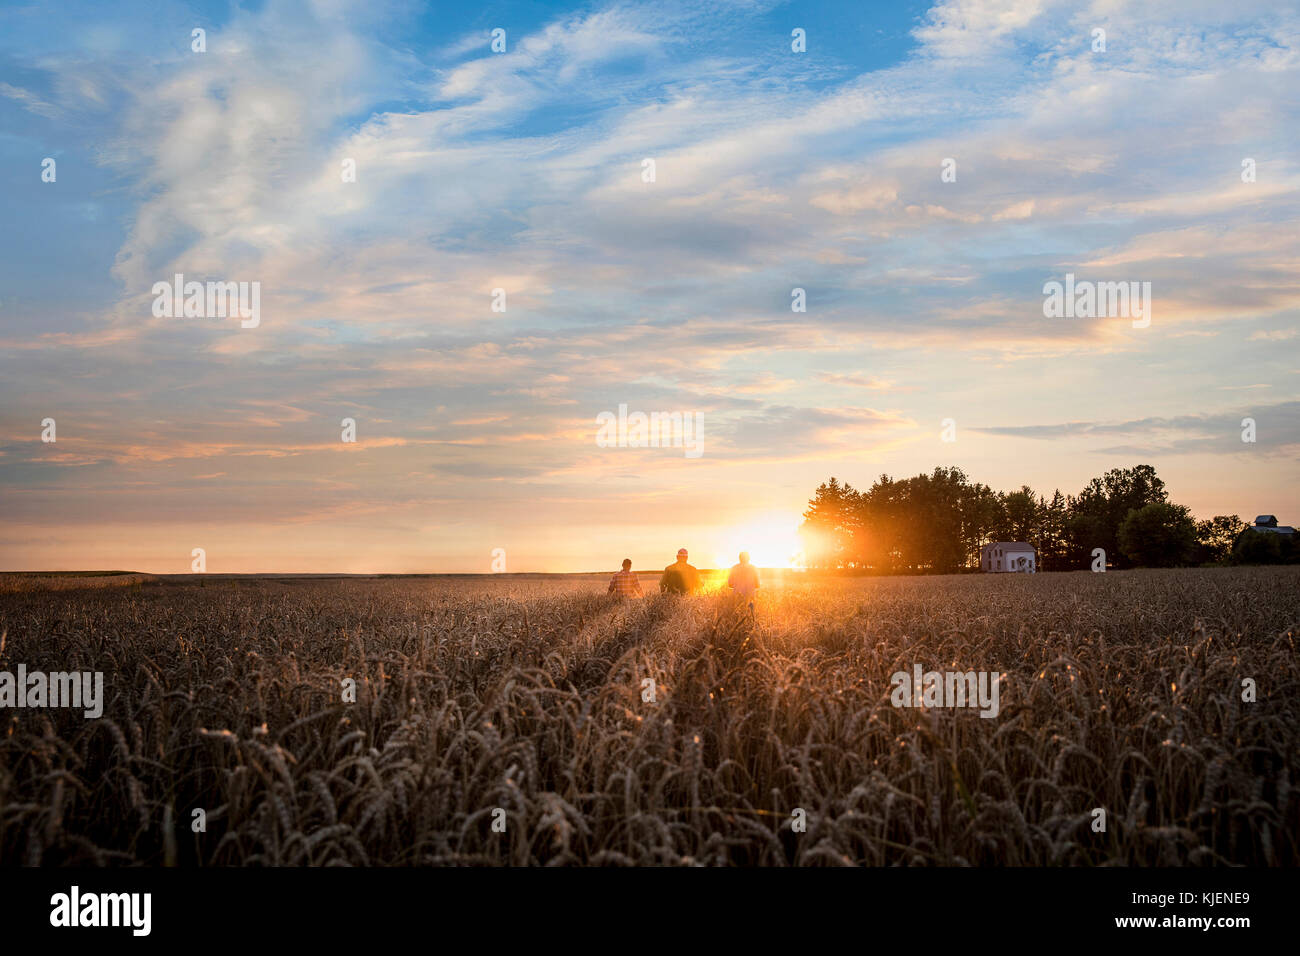 Distant Caucasian men in field of wheat at sunset Stock Photo